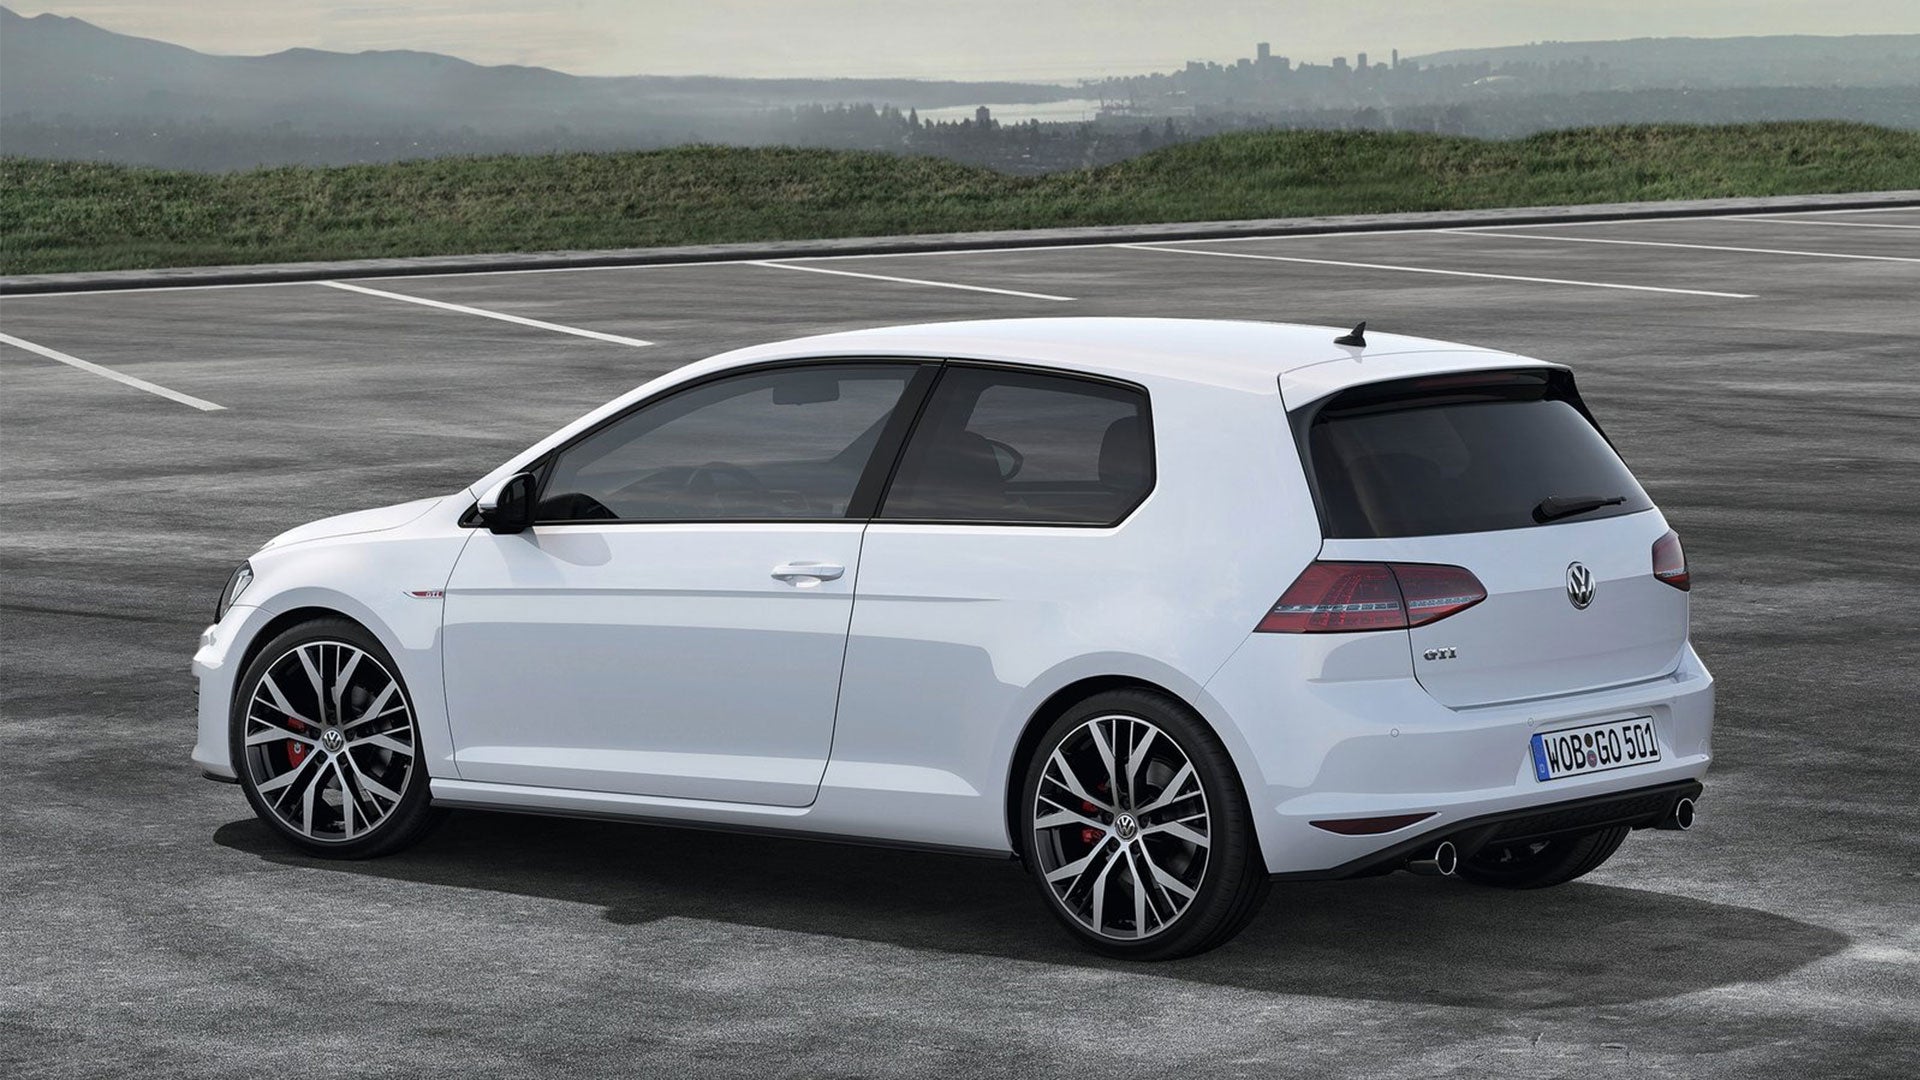 Volkswagen Golf Production Moves Back to Europe | The Drive